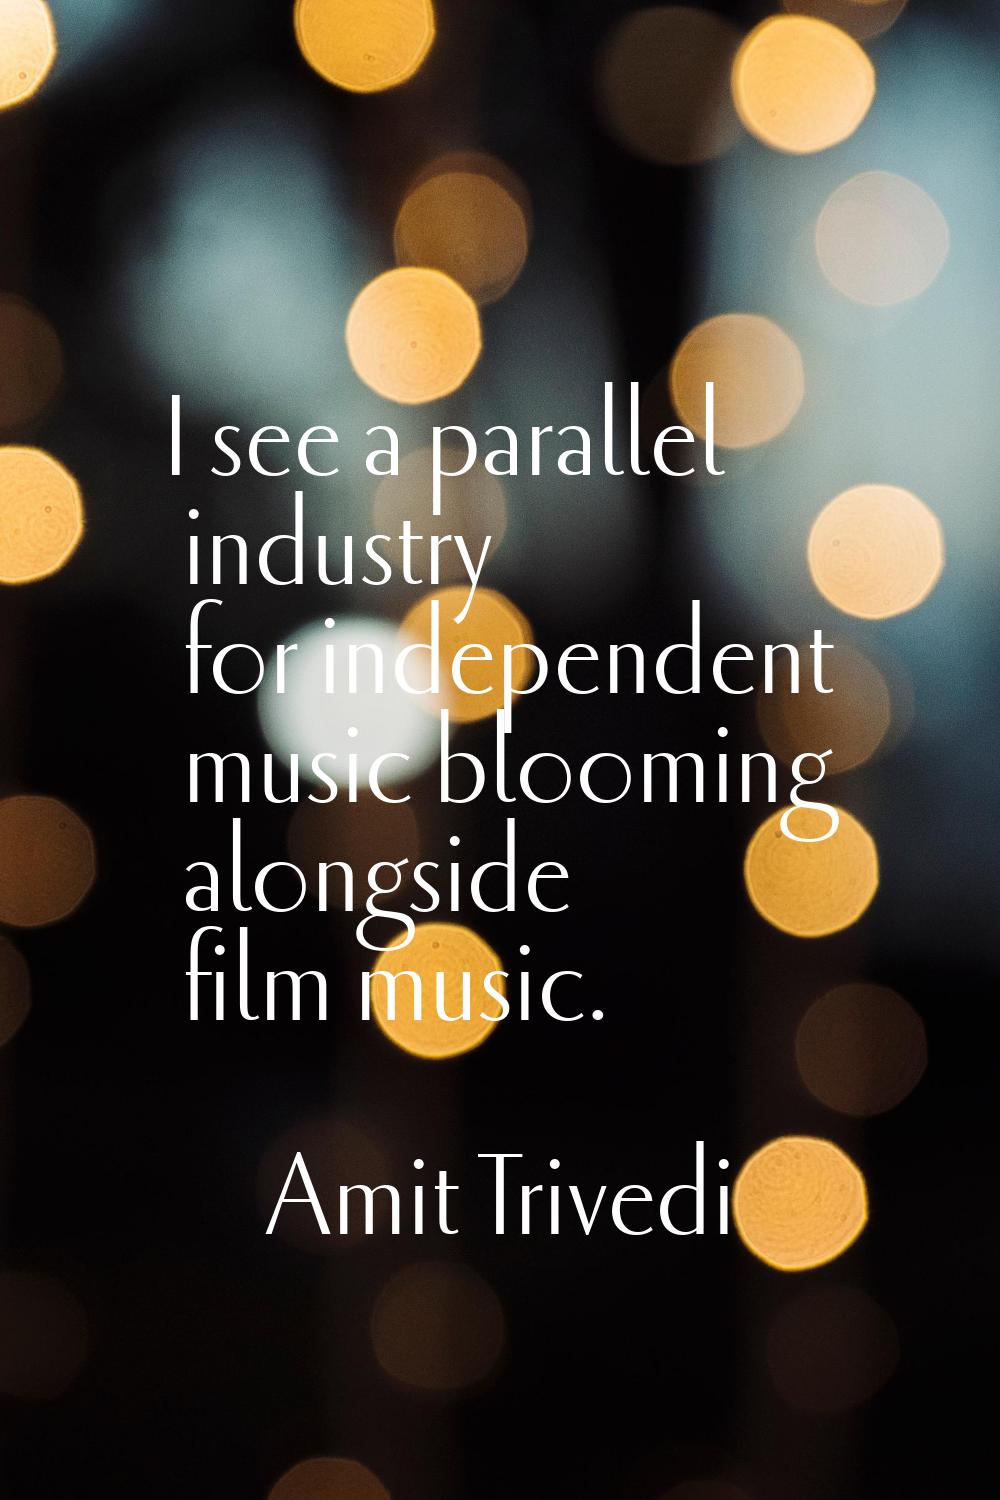 I see a parallel industry for independent music blooming alongside film music.